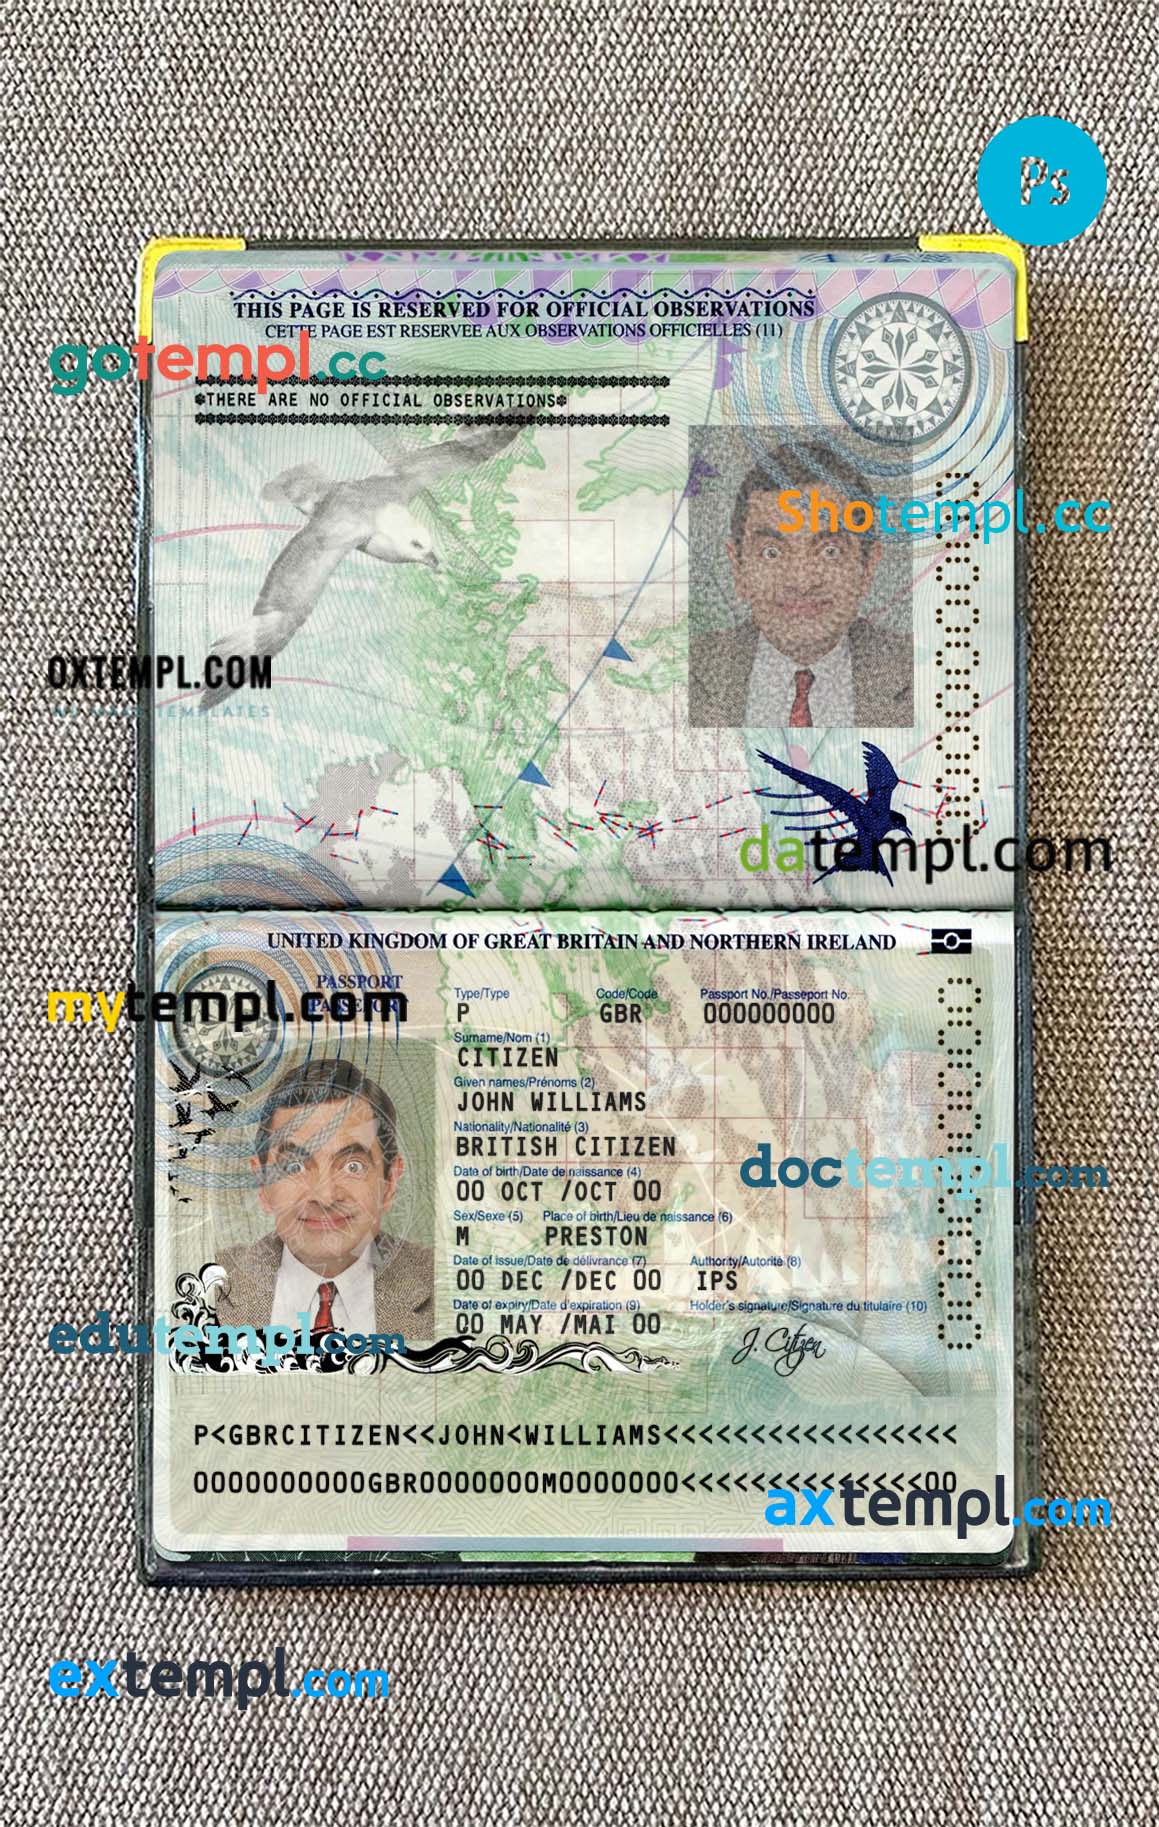 United Kingdom of Great Britain passport PSD files, scan and photograghed image (2010-2015),2 in 1